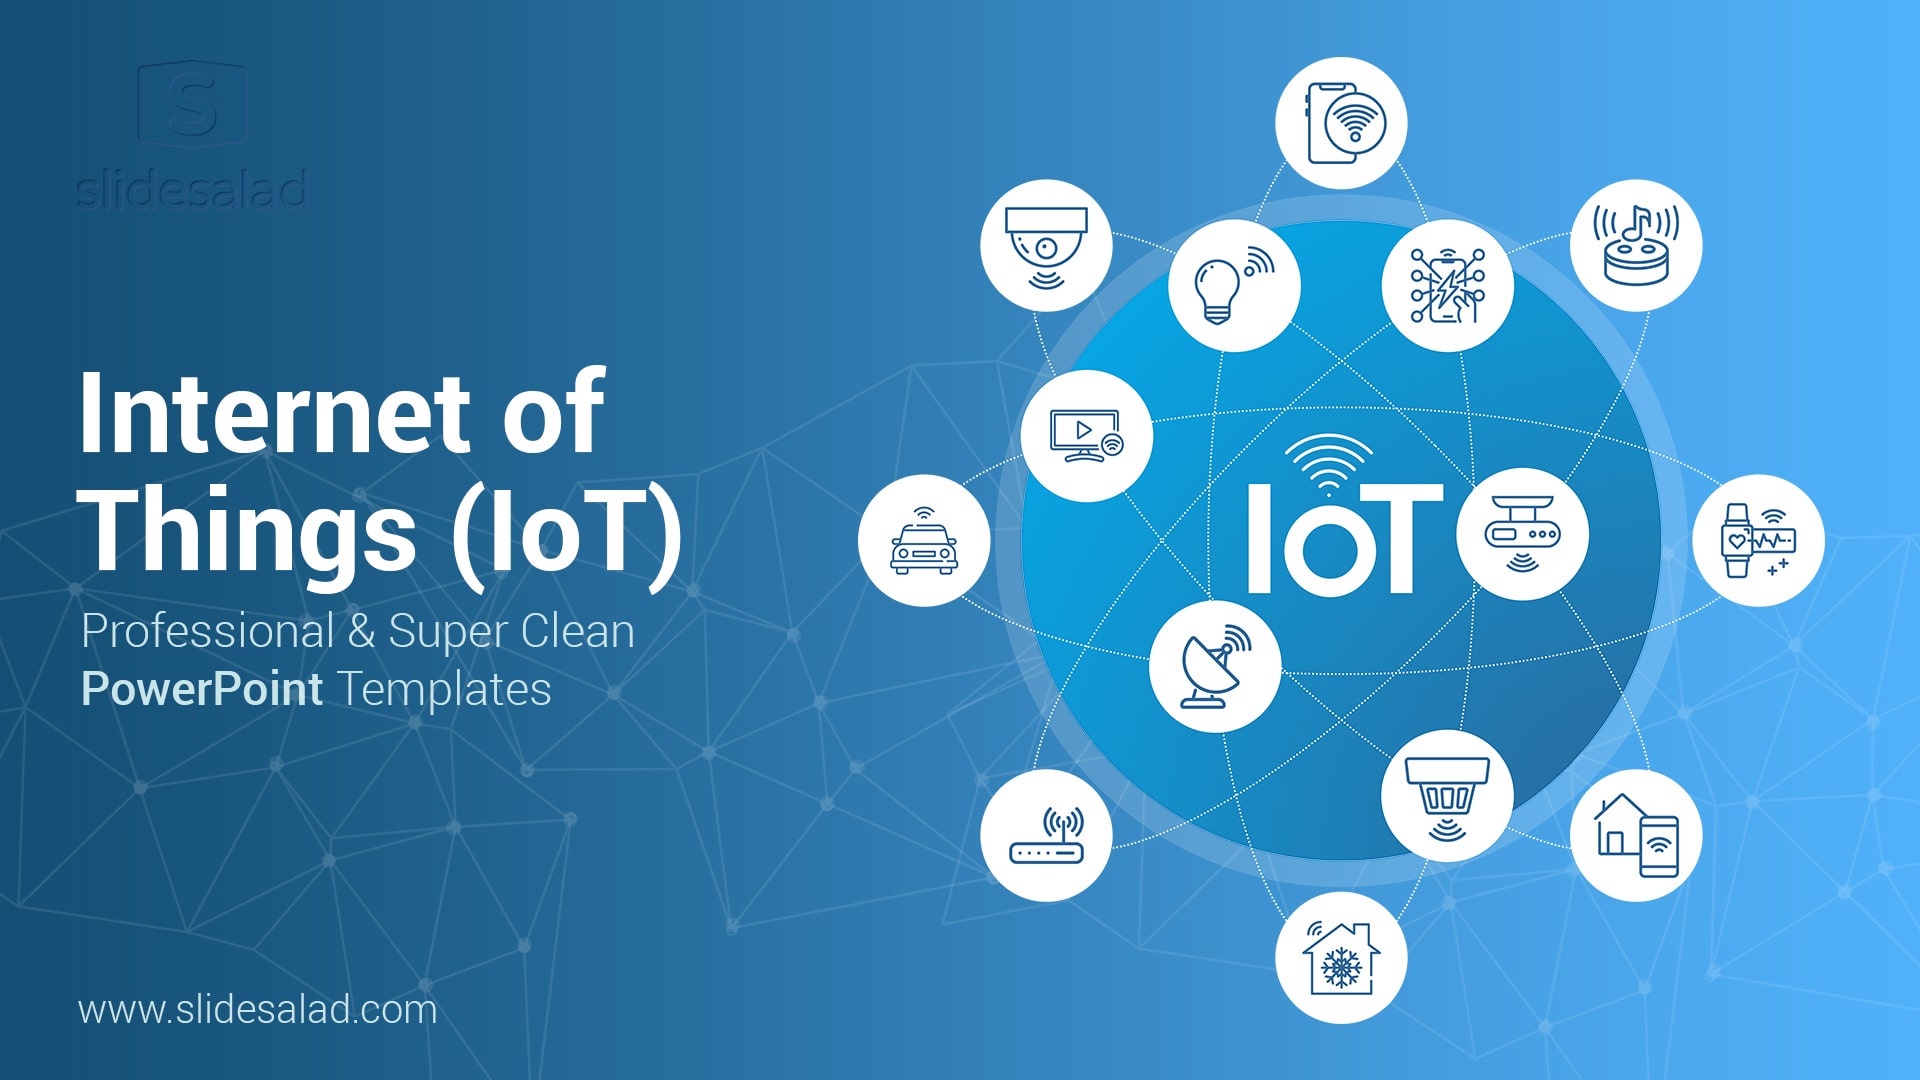 Internet of Things PowerPoint Template Designs - Make Creative Presentations on IoT, the Network of Physical Objects